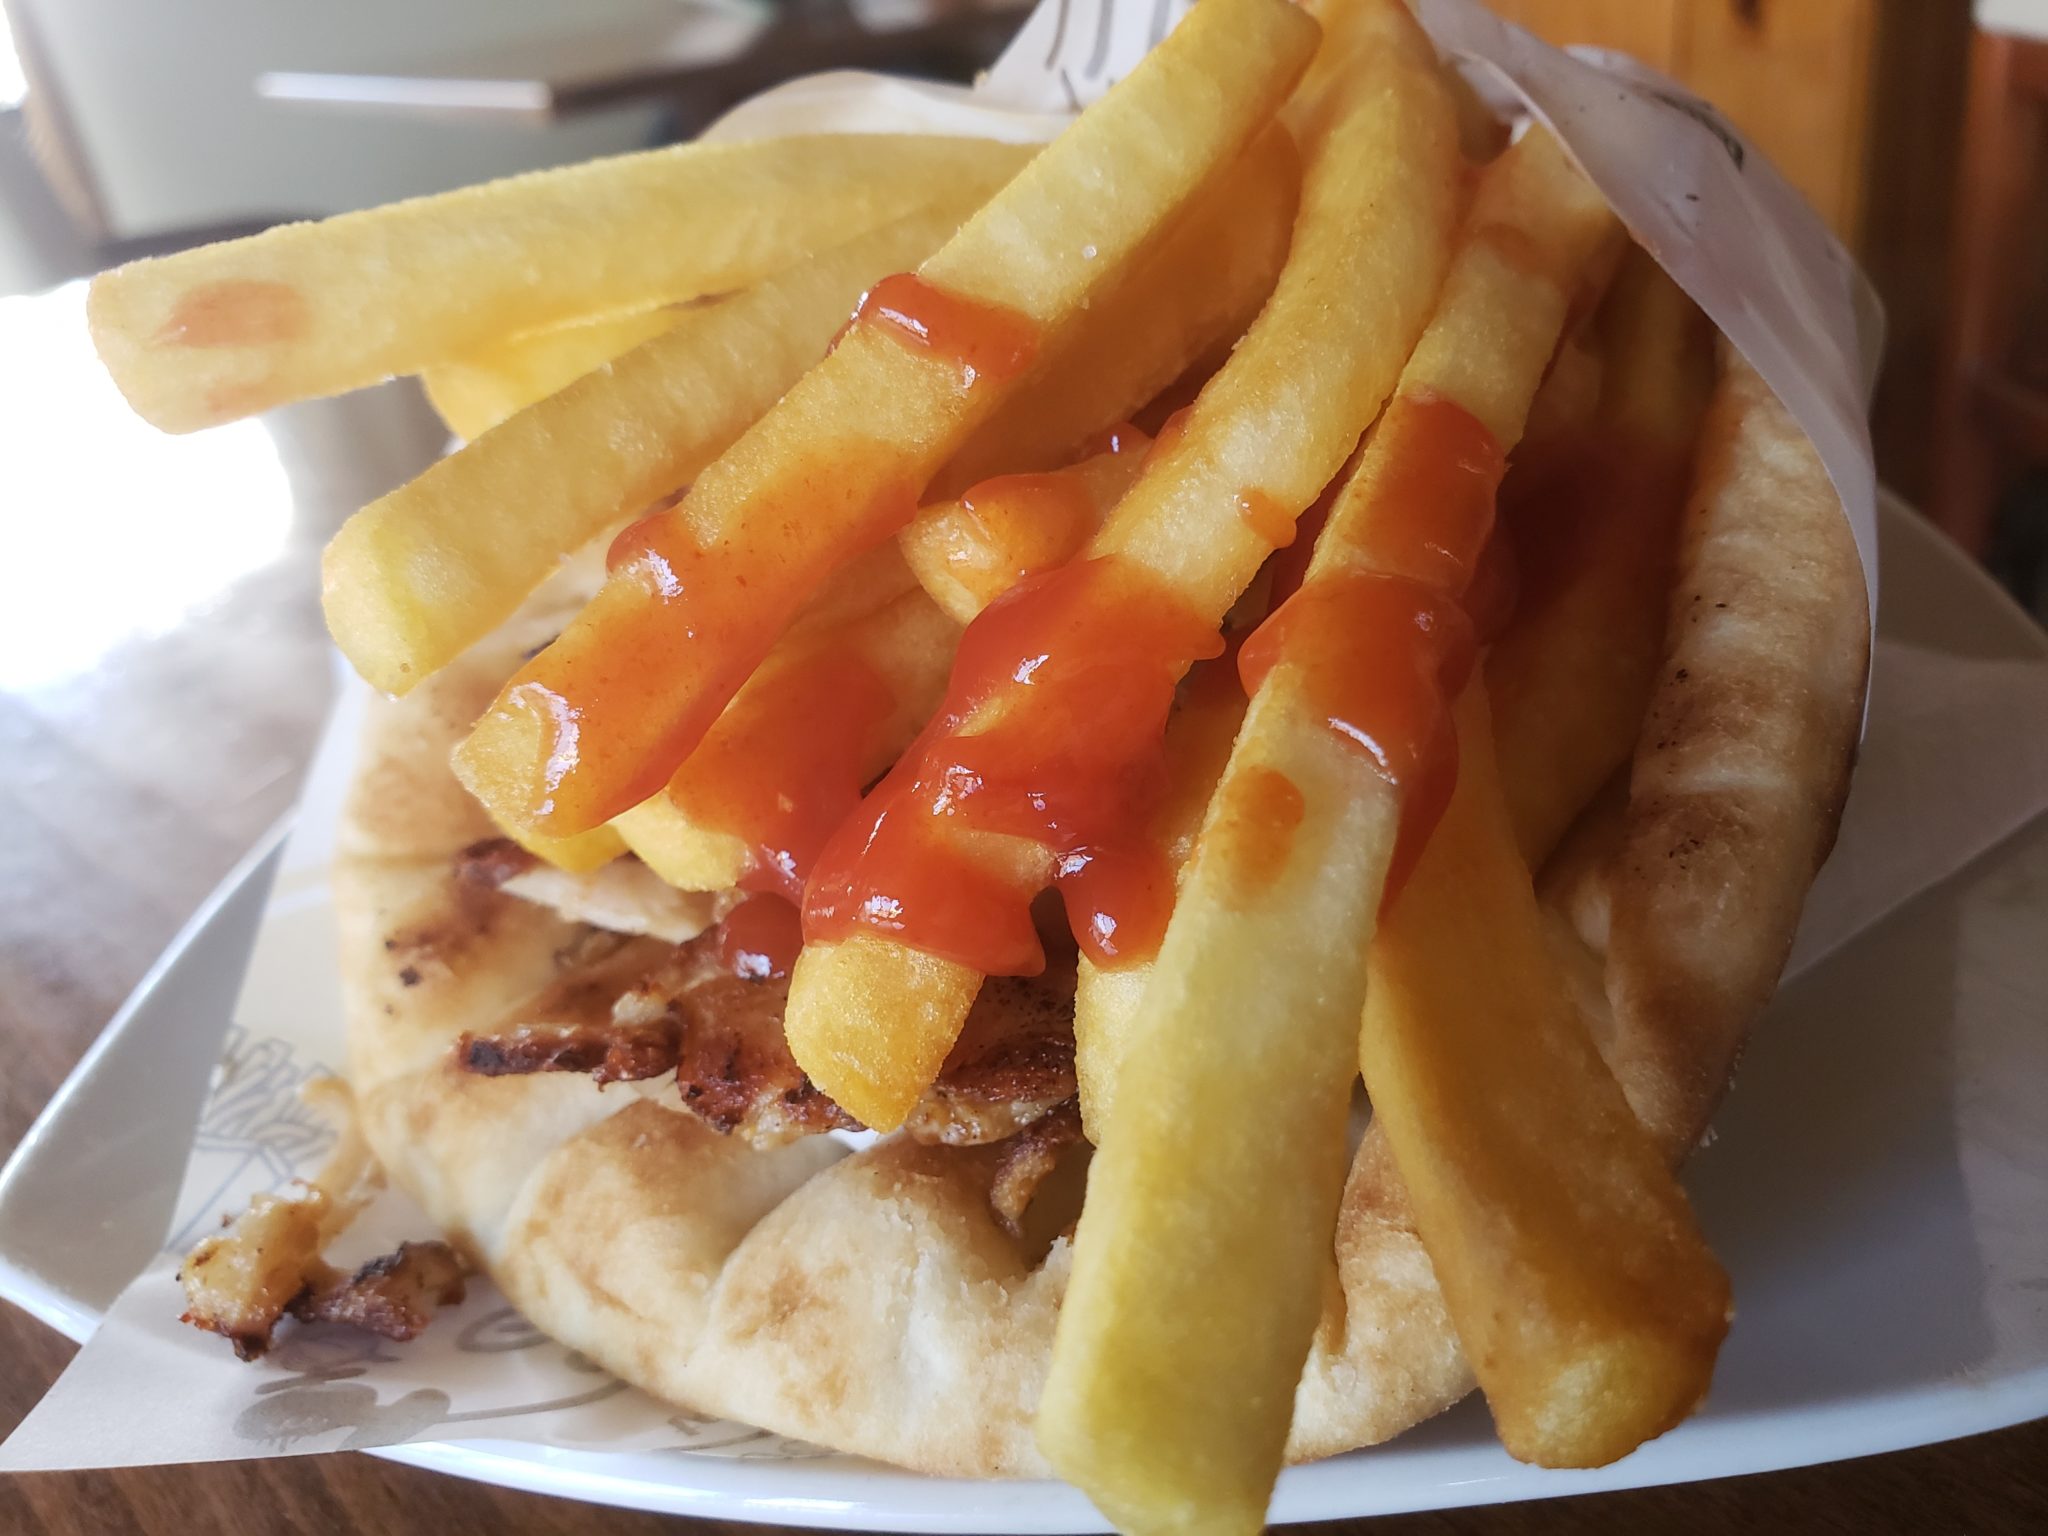 a pita bread with french fries and ketchup on top